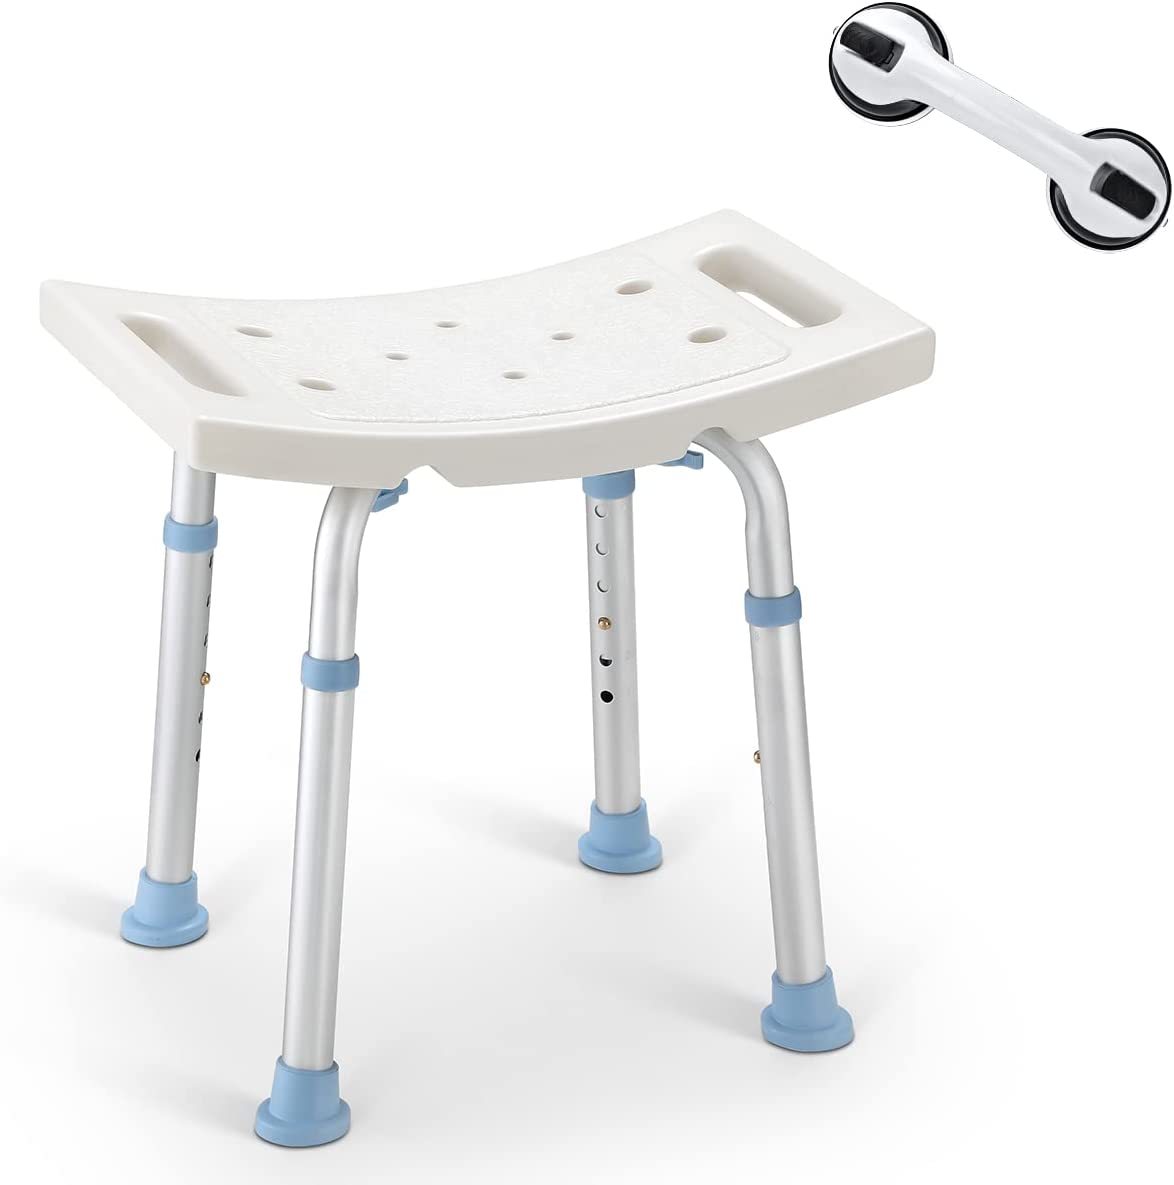 Primary image for OasisSpace Shower Chair, Adjustable Bath Stool with Free Assist Grab Bar -